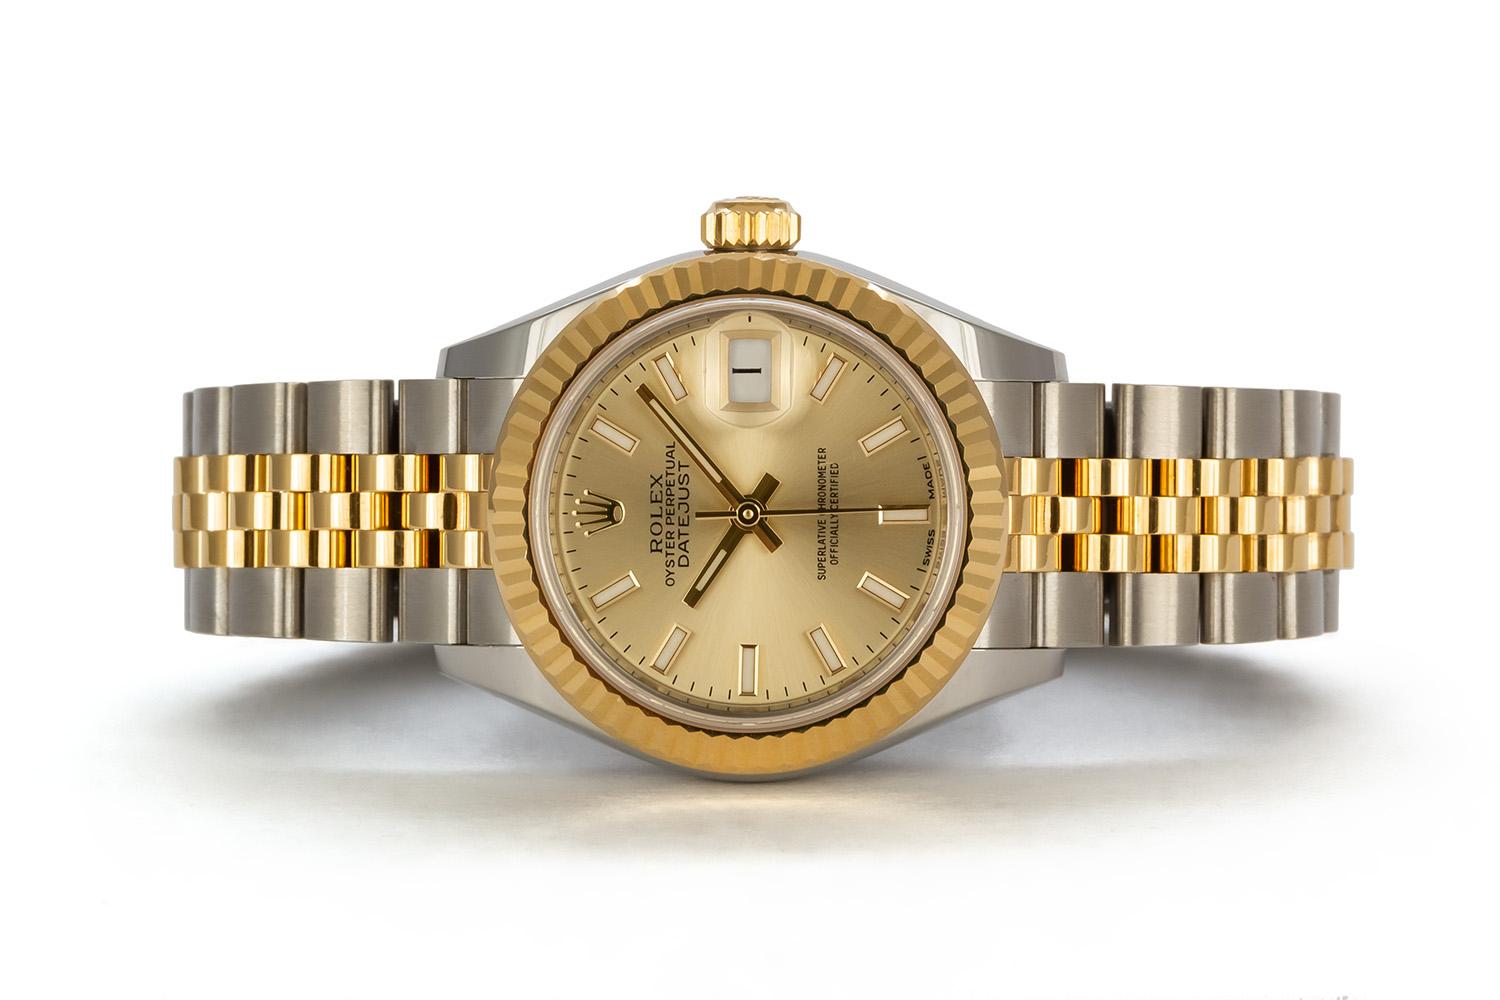 We are pleased to offer this 2019 Rolex Two Tone 18k Yellow Gold & Stainless Steel 28mm Datejust 279173, still under factory warranty. It features a Rolex factory champagne stick dial with yellow gold markers and hands, Rolex factory 18k yellow gold